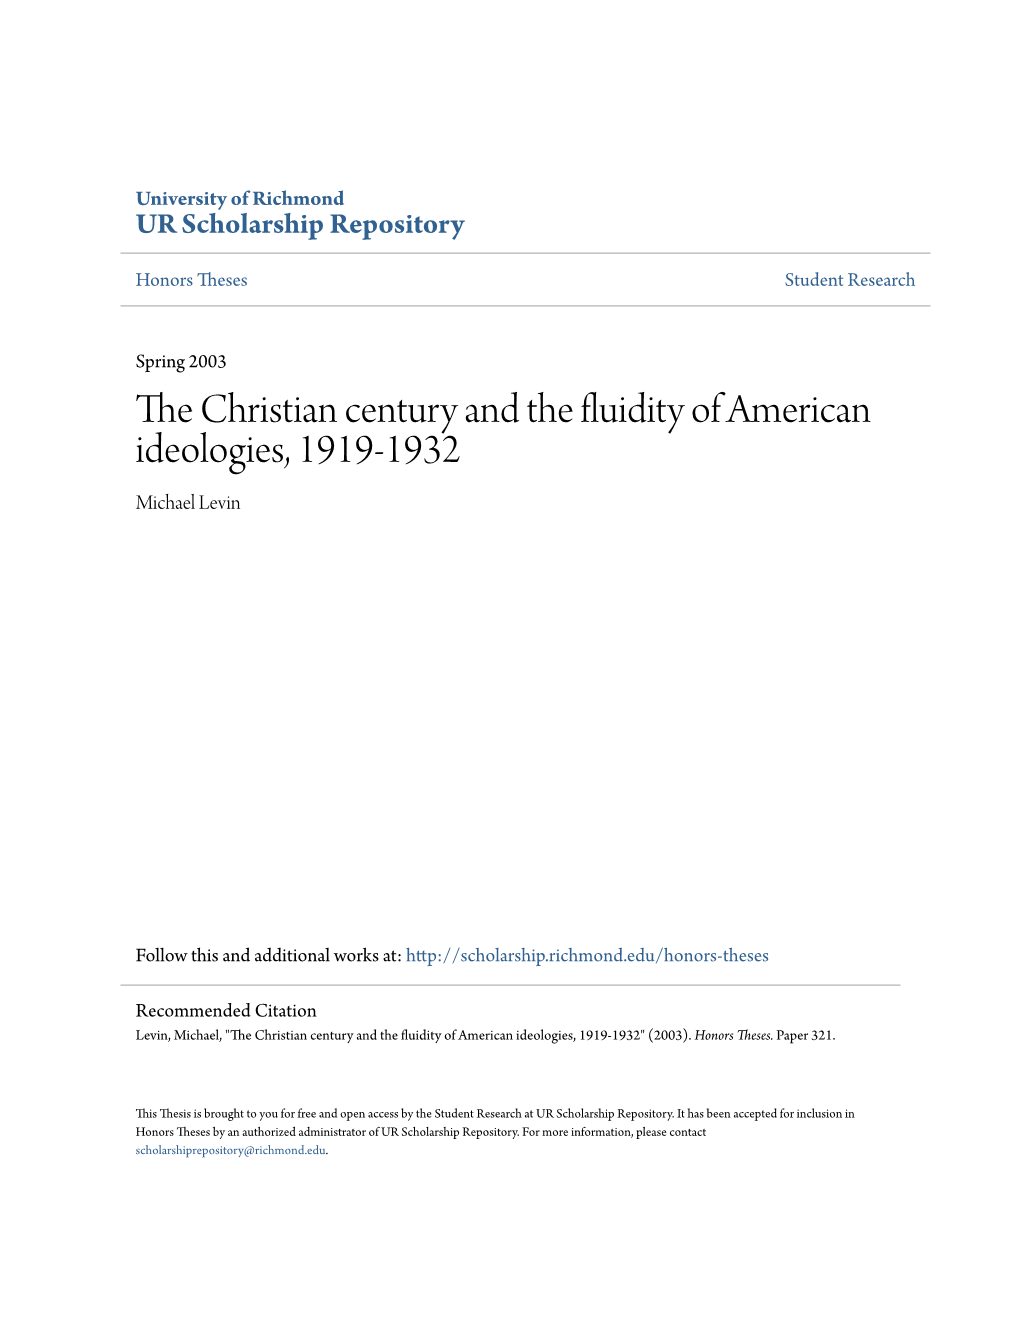 The Christian Century and the Fluidity of American Ideologies, 1919-1932